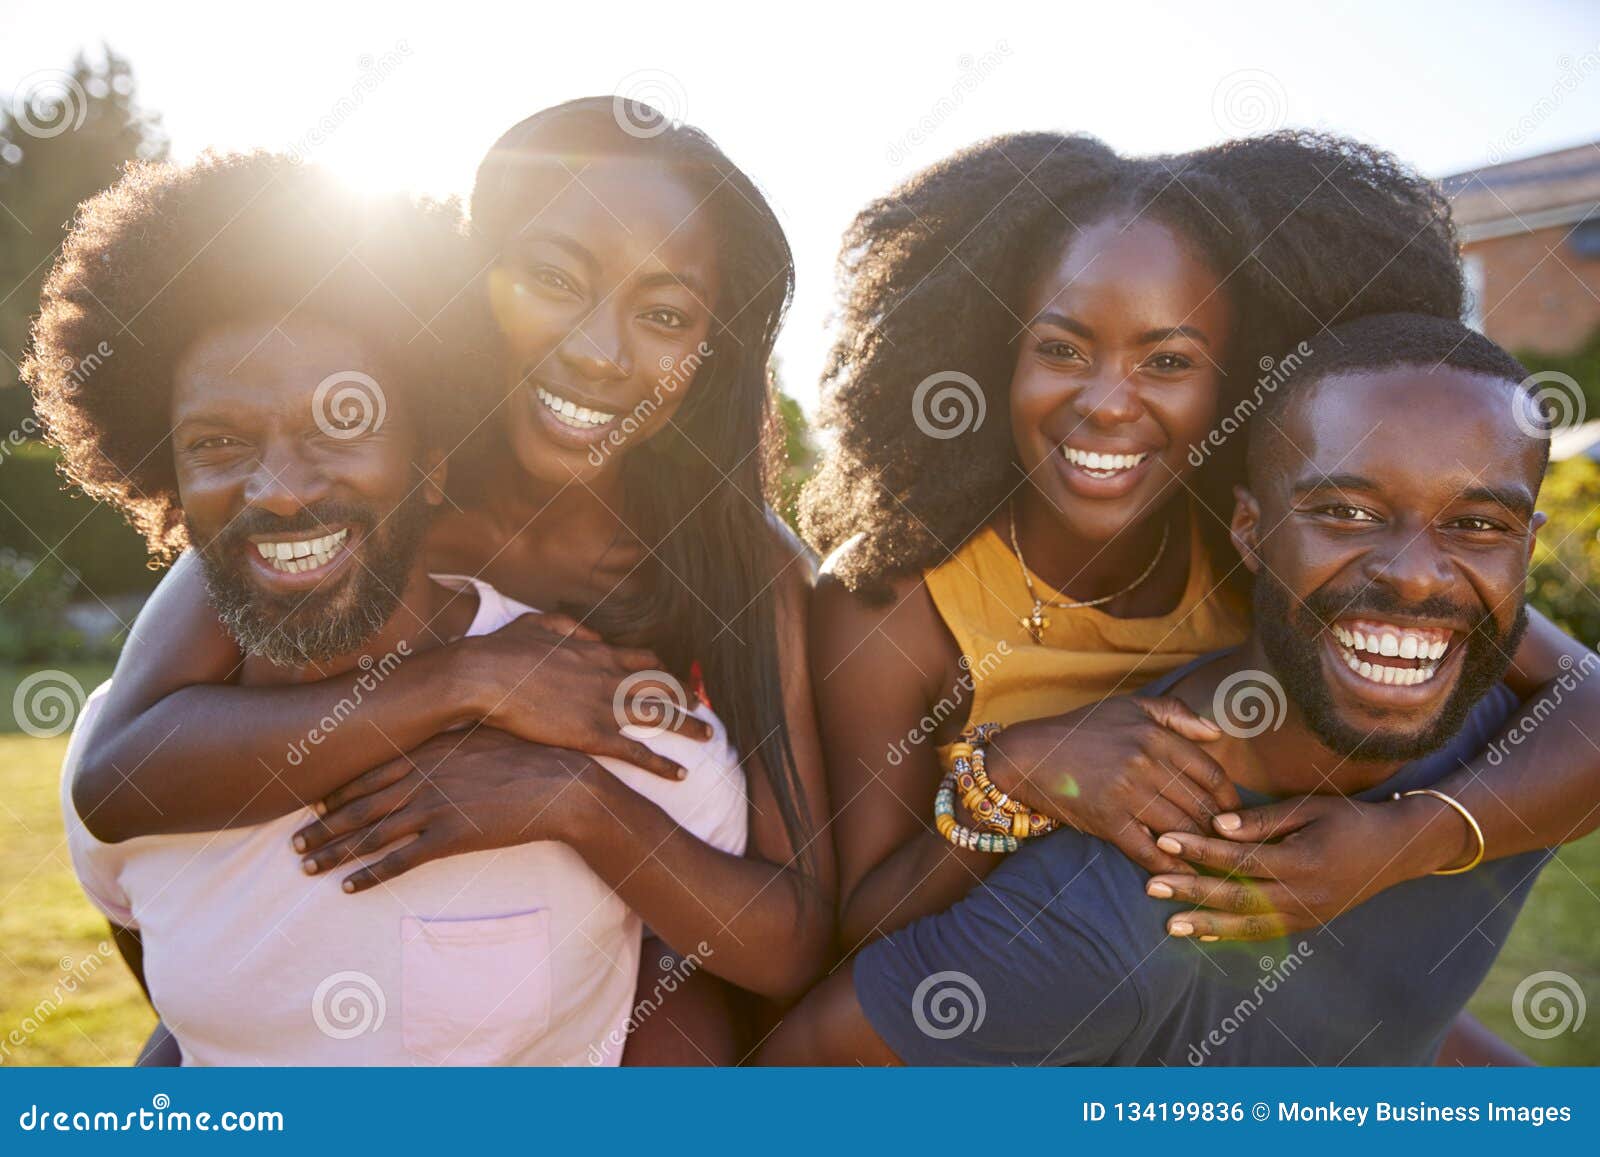 two black couples, men piggybacking their partners, close up